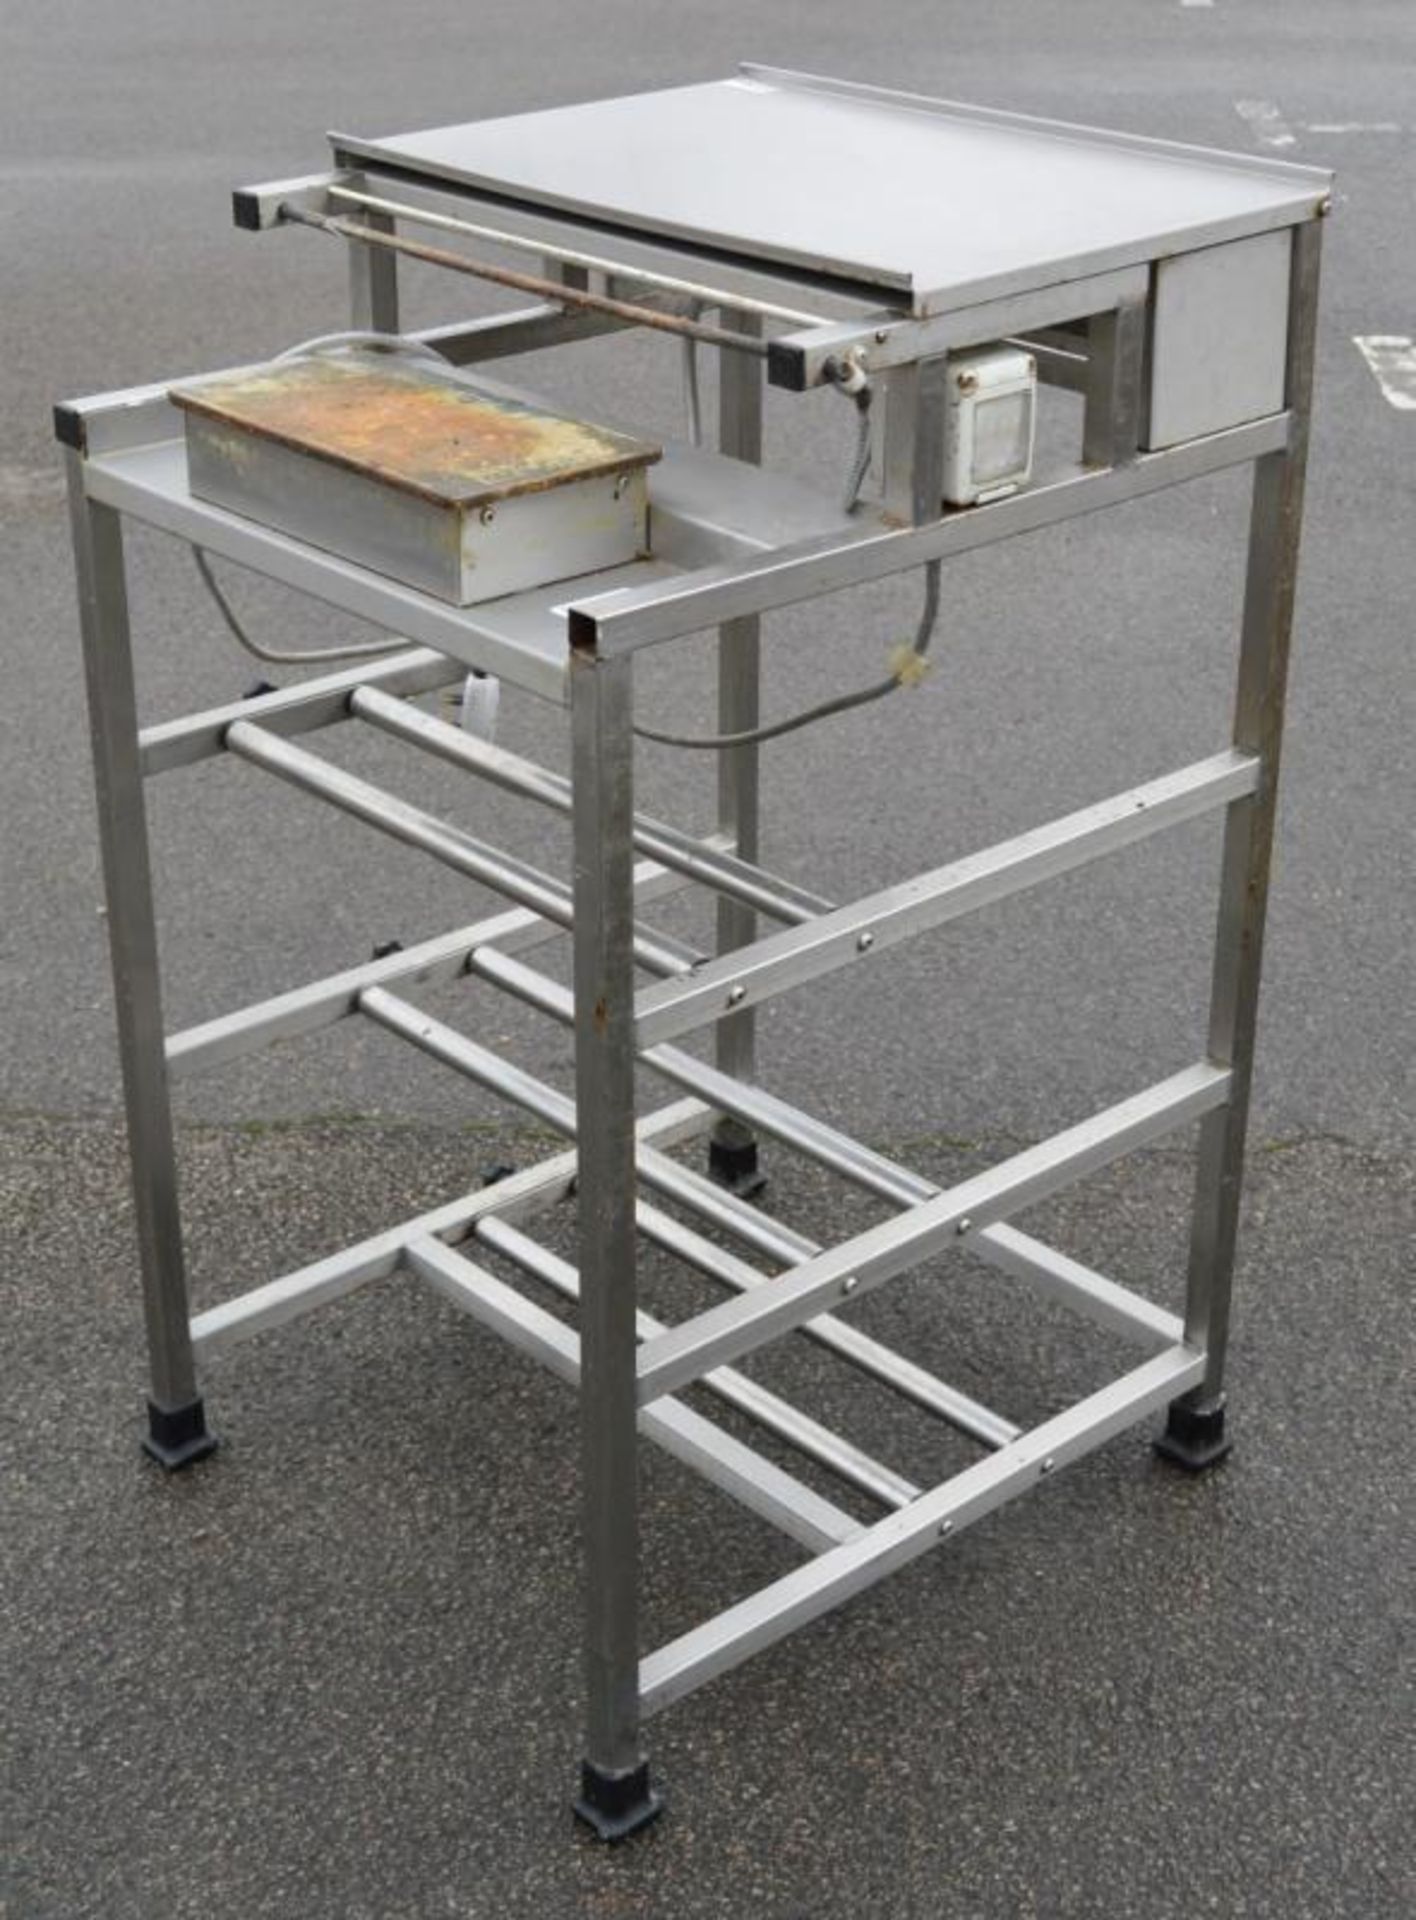 1 x Freestanding Stretch Wrap Tray Overwapper Machine - Stainless Steel Constructons - 240v -